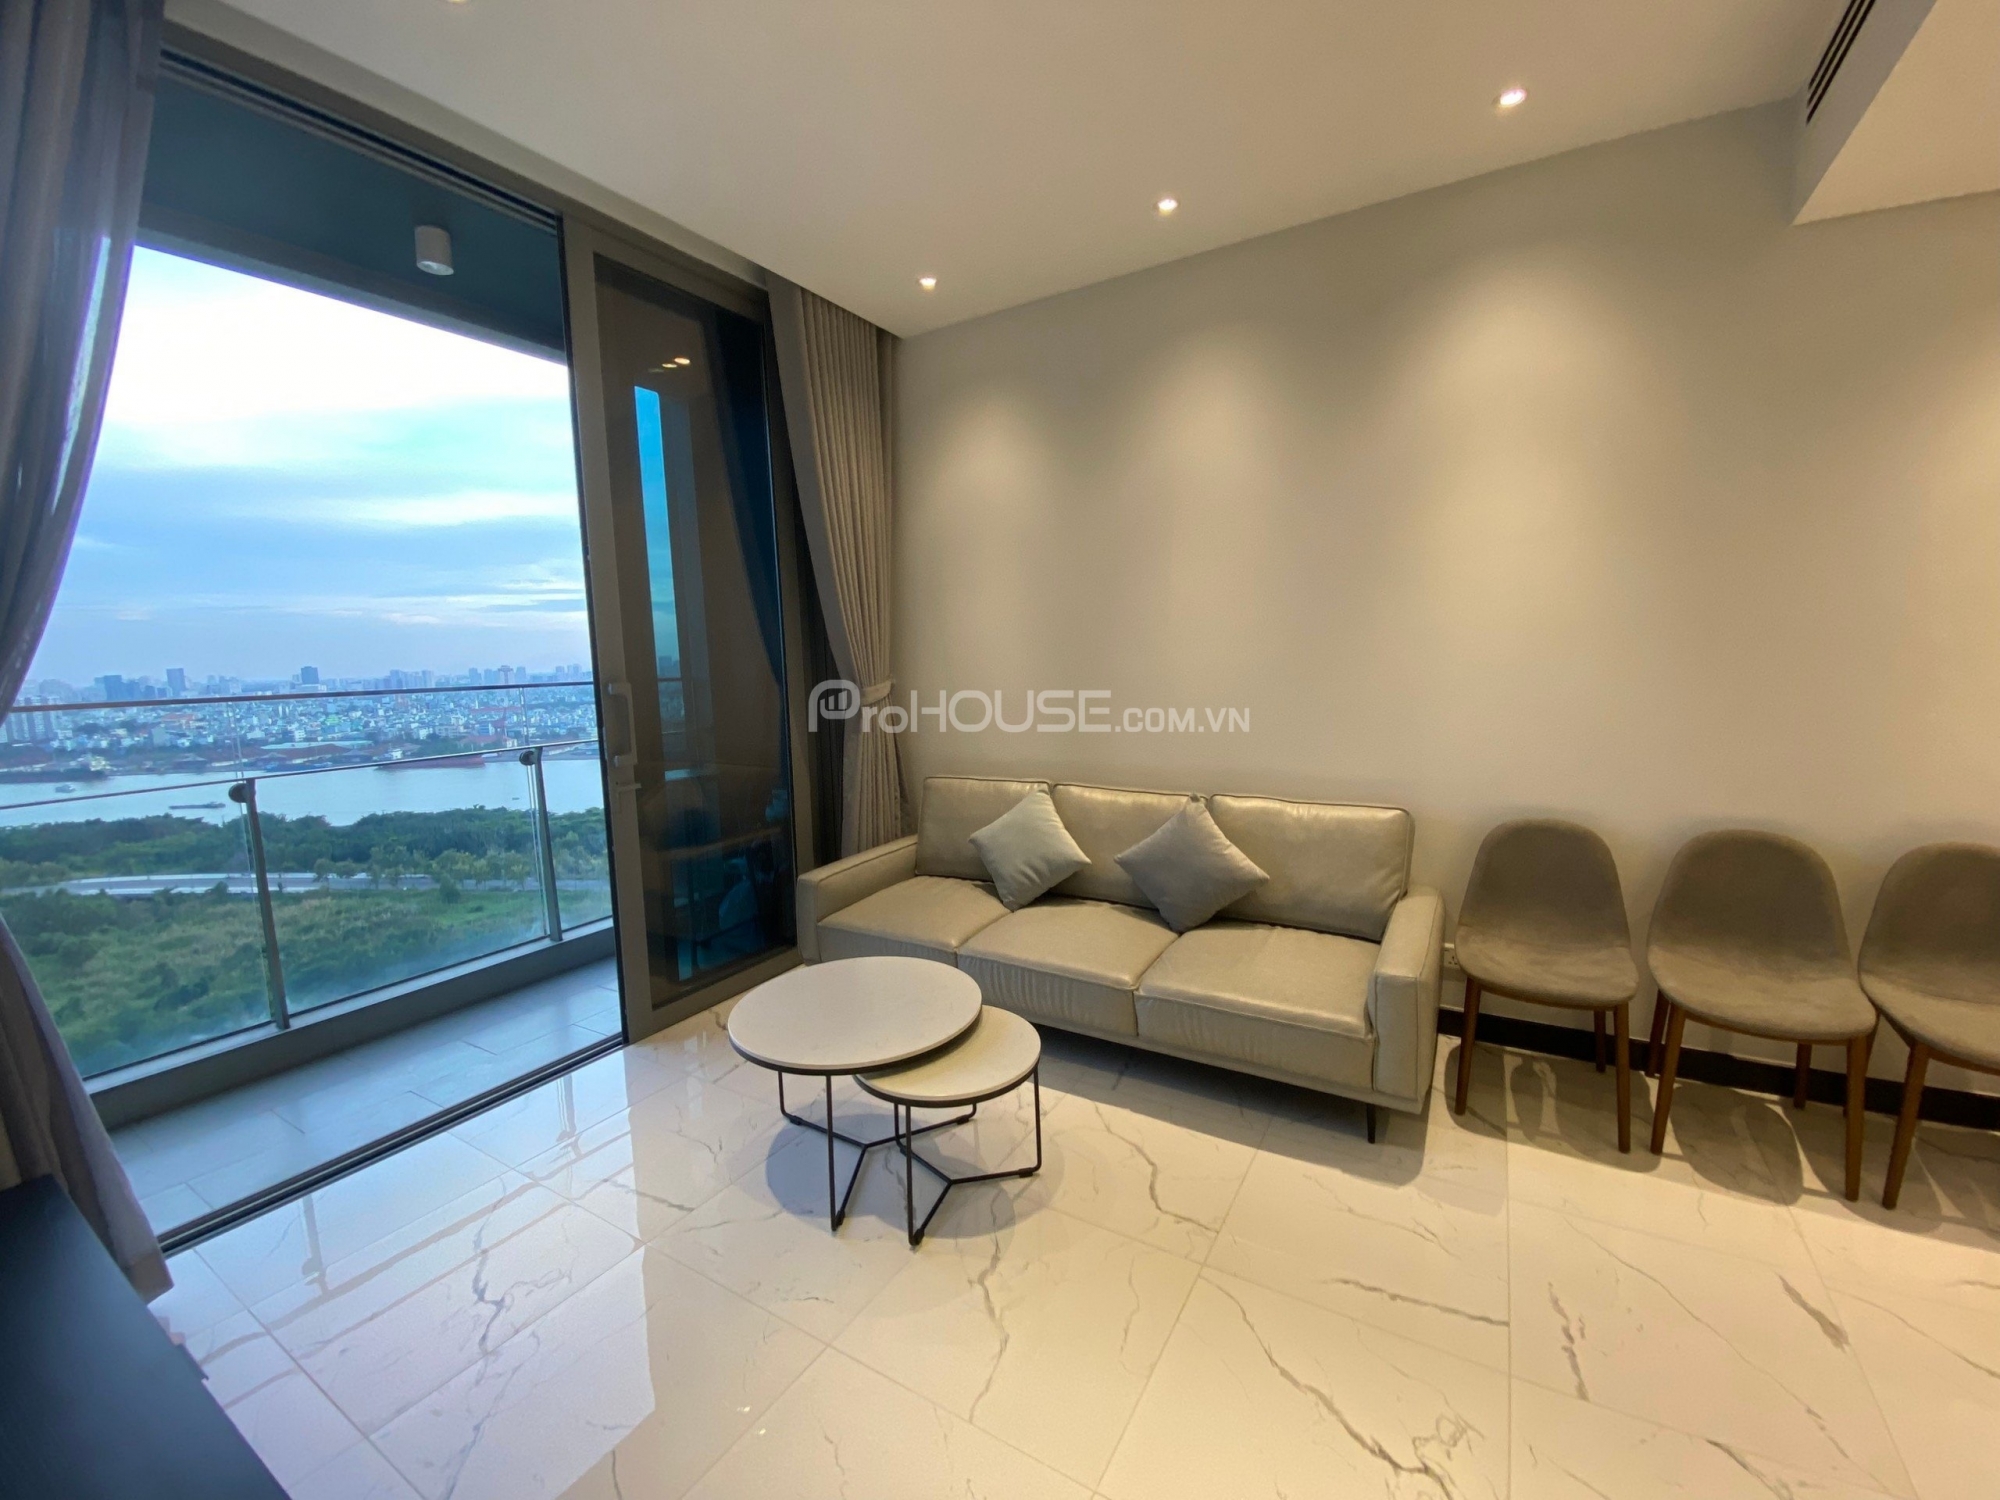 1 bedroom river view apartment for rent in Empire City with full furniture